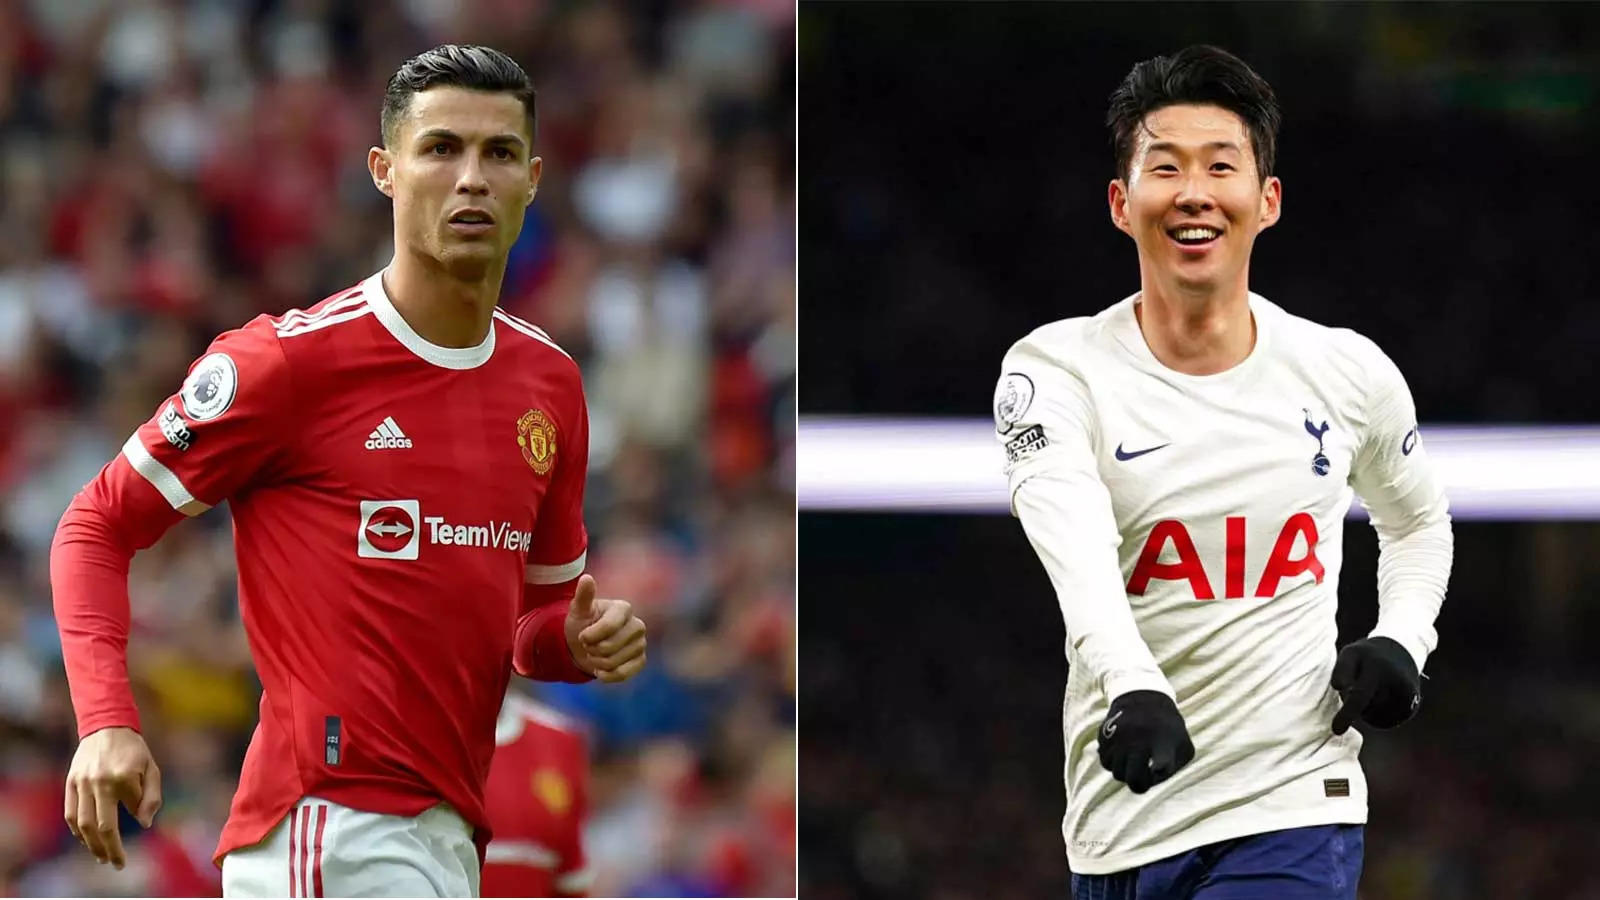 Cristiano Ronaldo earned the nod over Son Heung-min in PFA Team of the Year